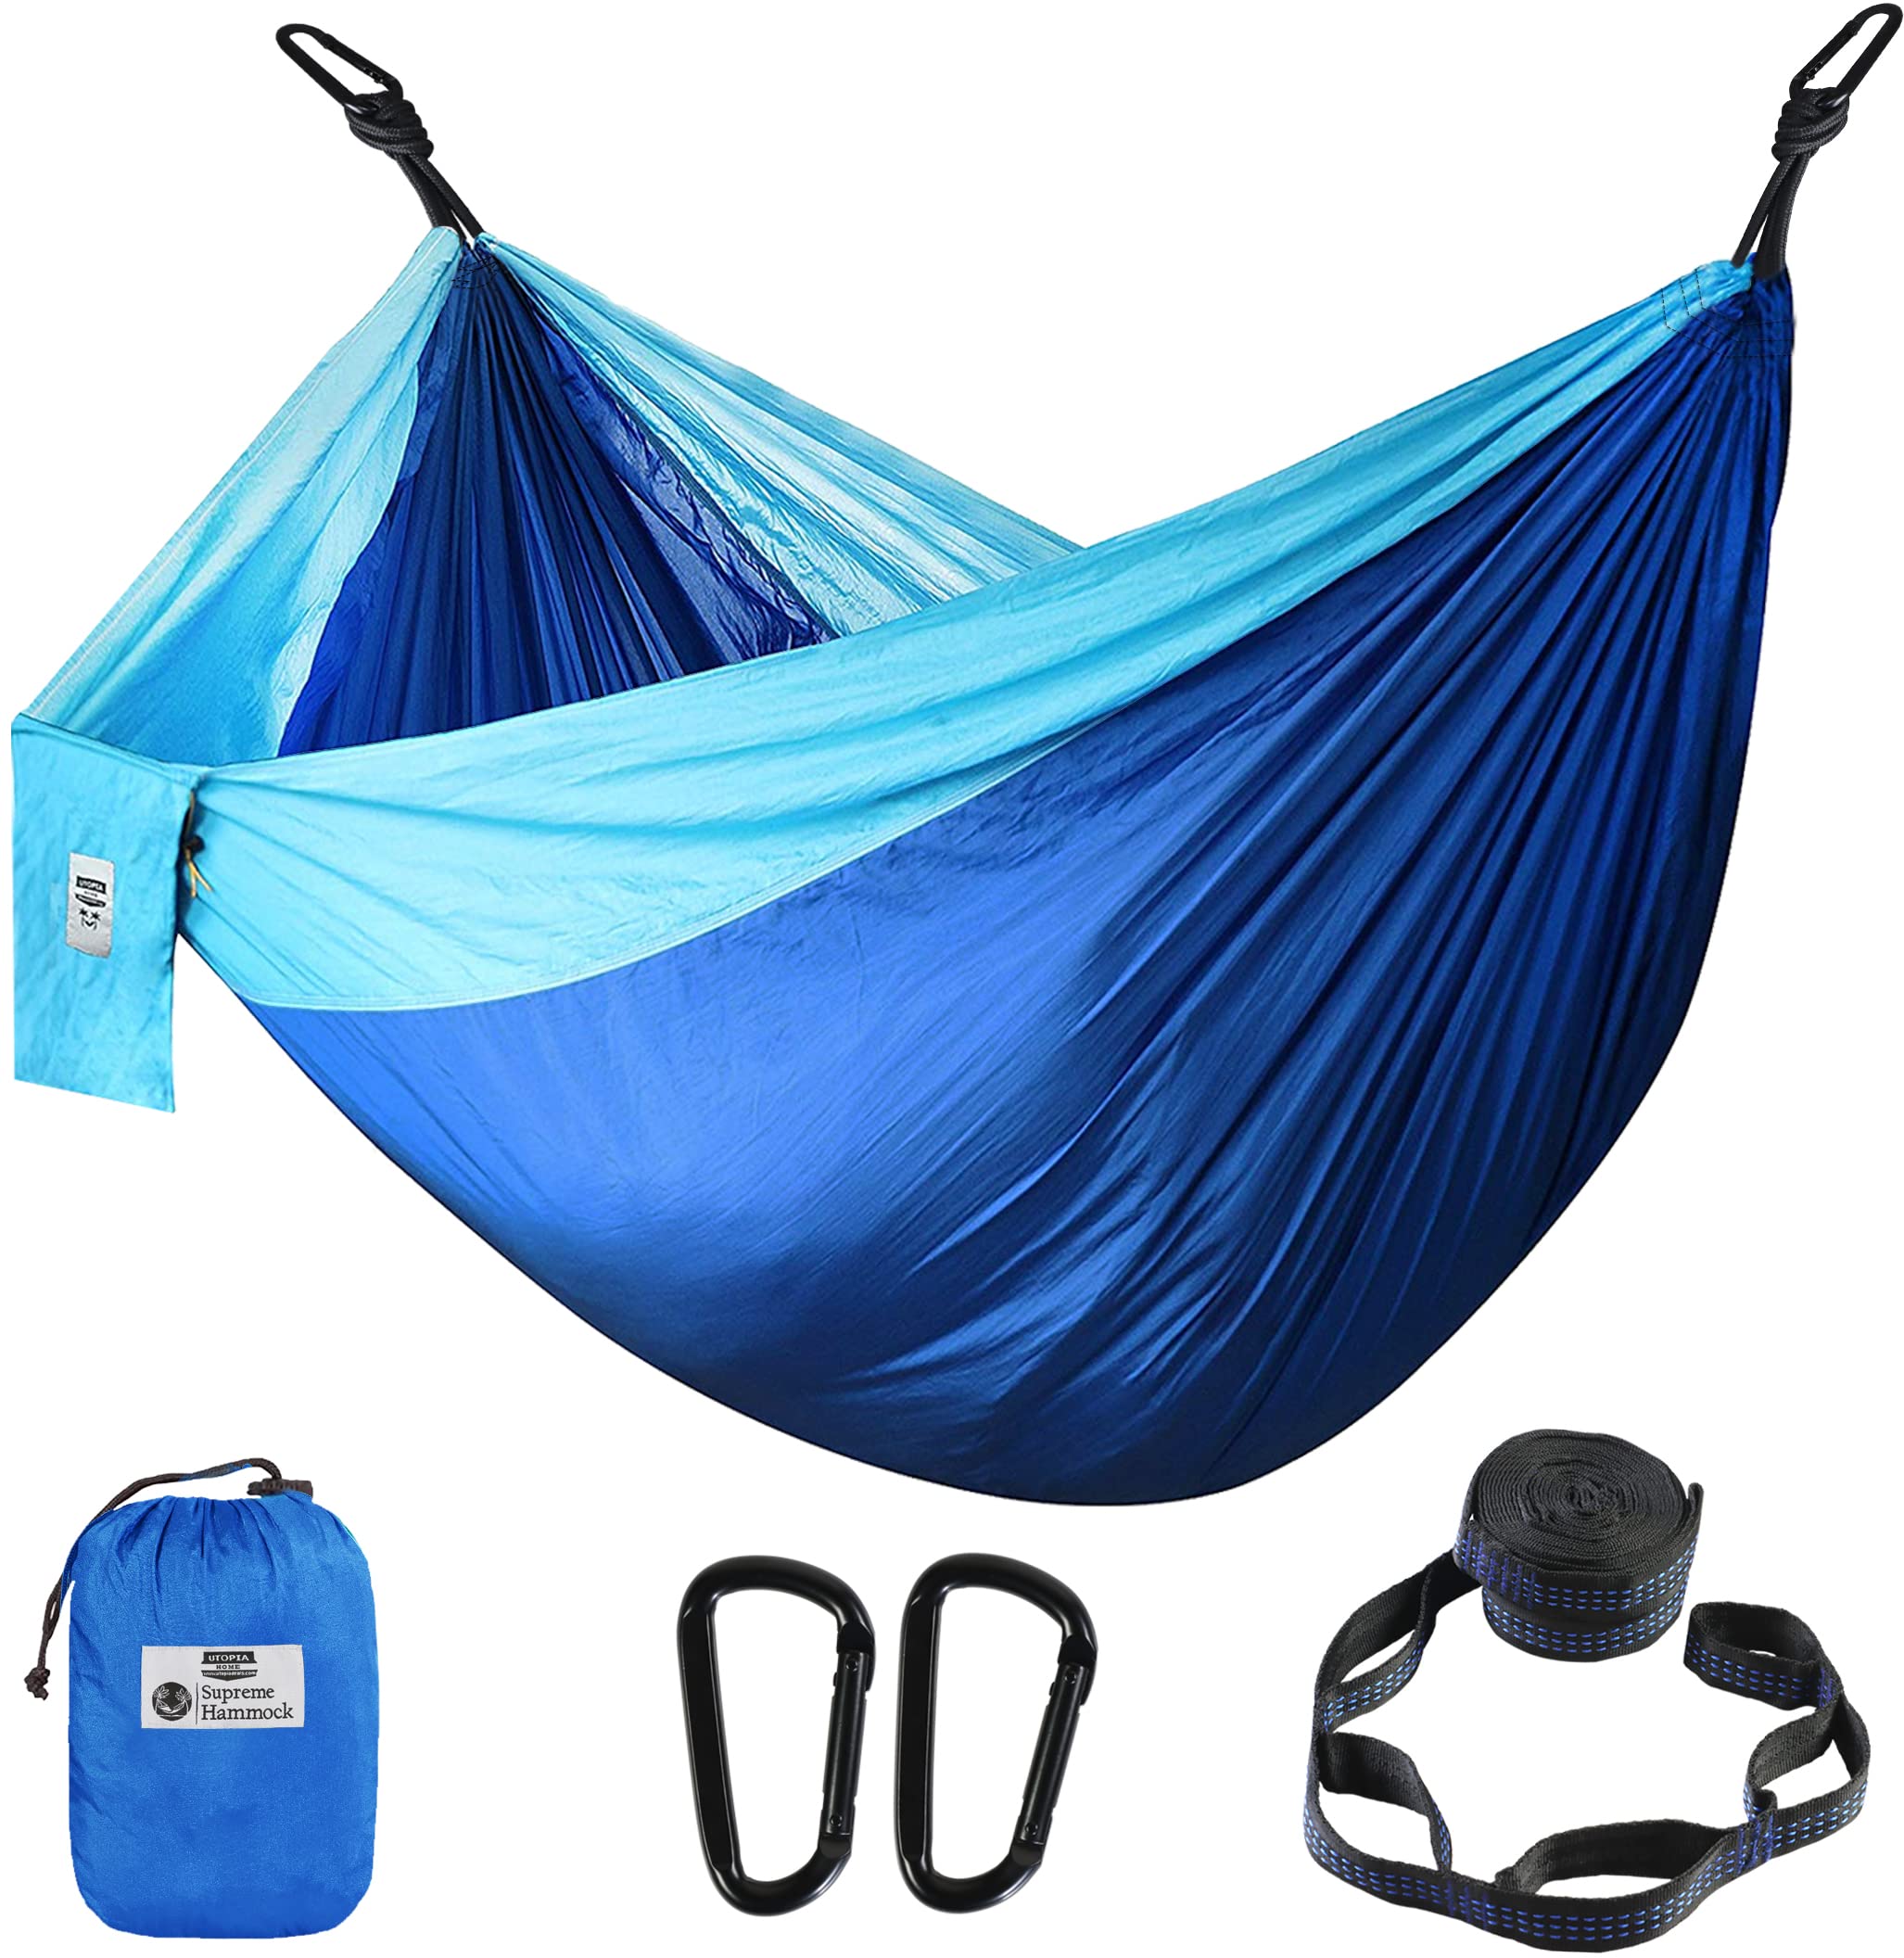 Utopia Home Camping Hammock Double & Single with 2 Tree Hammock Straps,  Travel Hammock Backpacking Nylon Parachute Hammock for Outdoor & Hiking  Large Blue & Light Blue